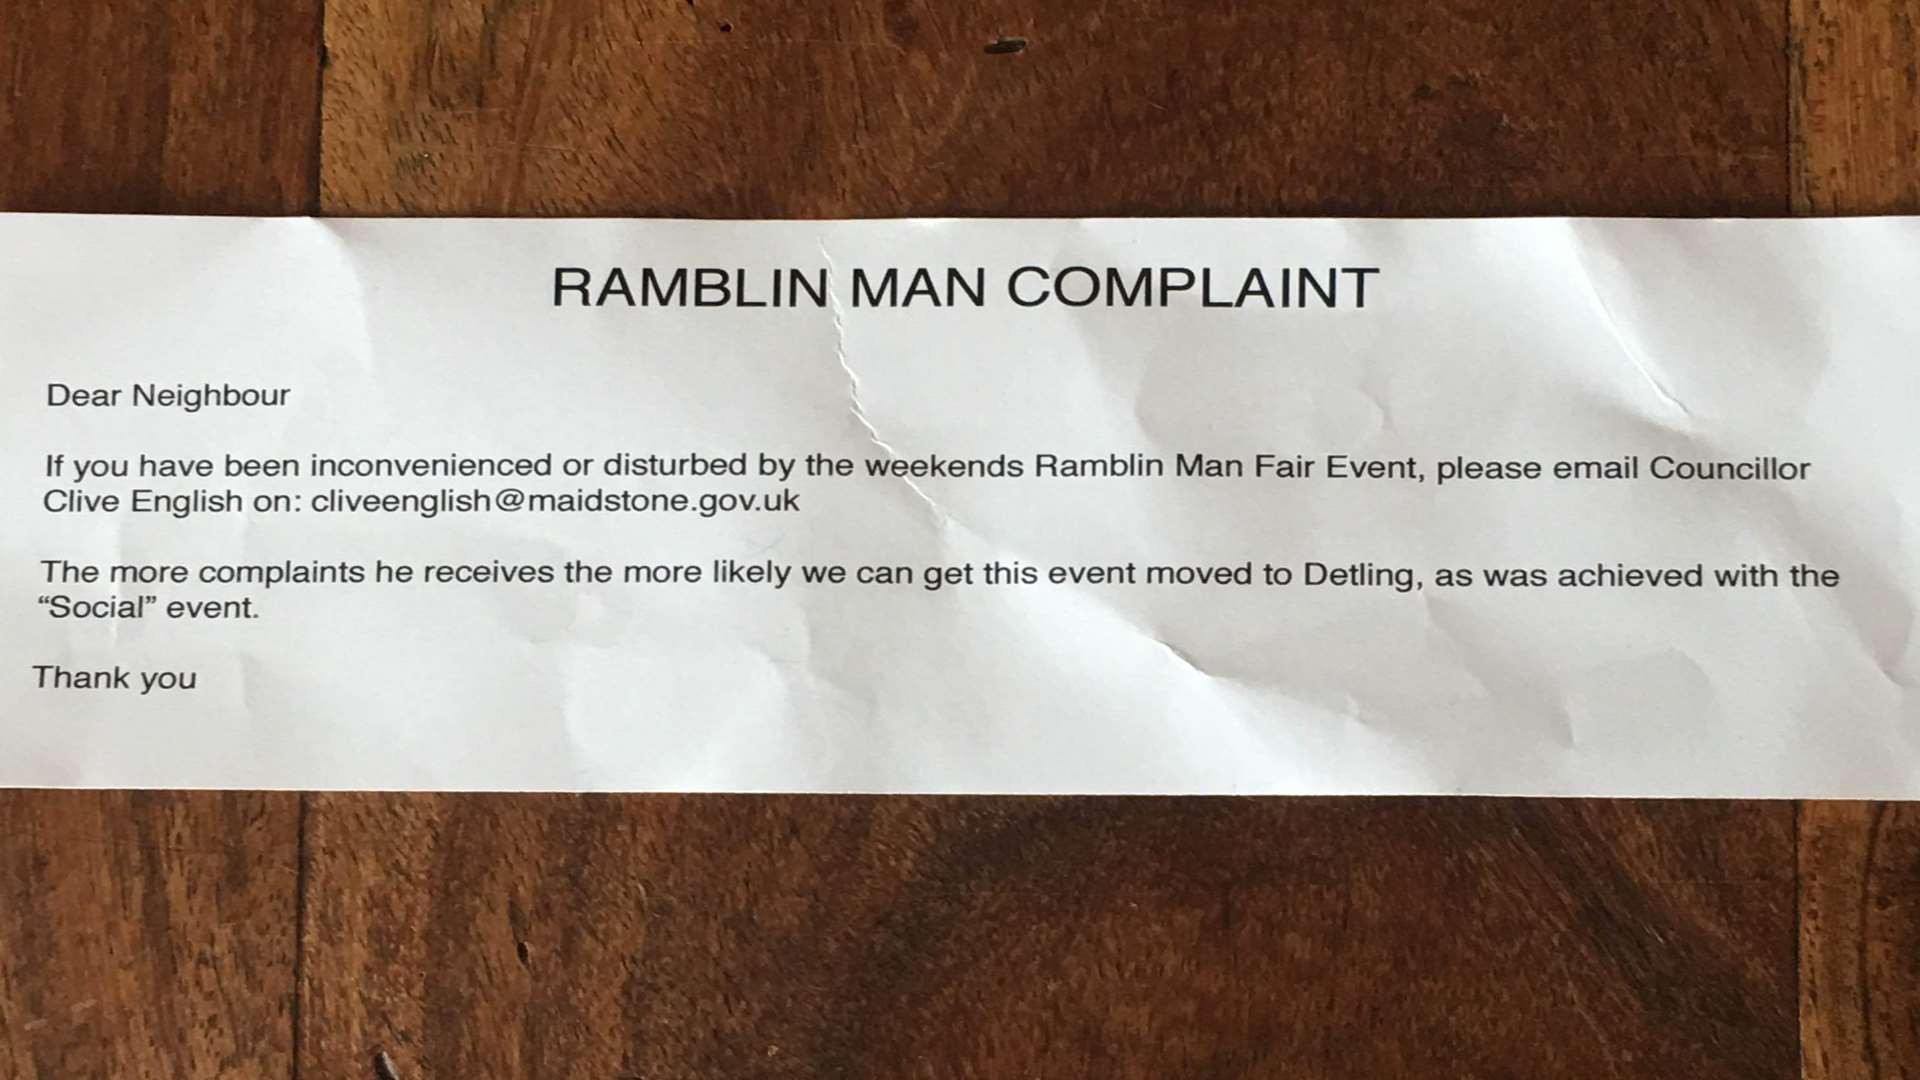 Residents living close to Mote Park received a note asking them to complain